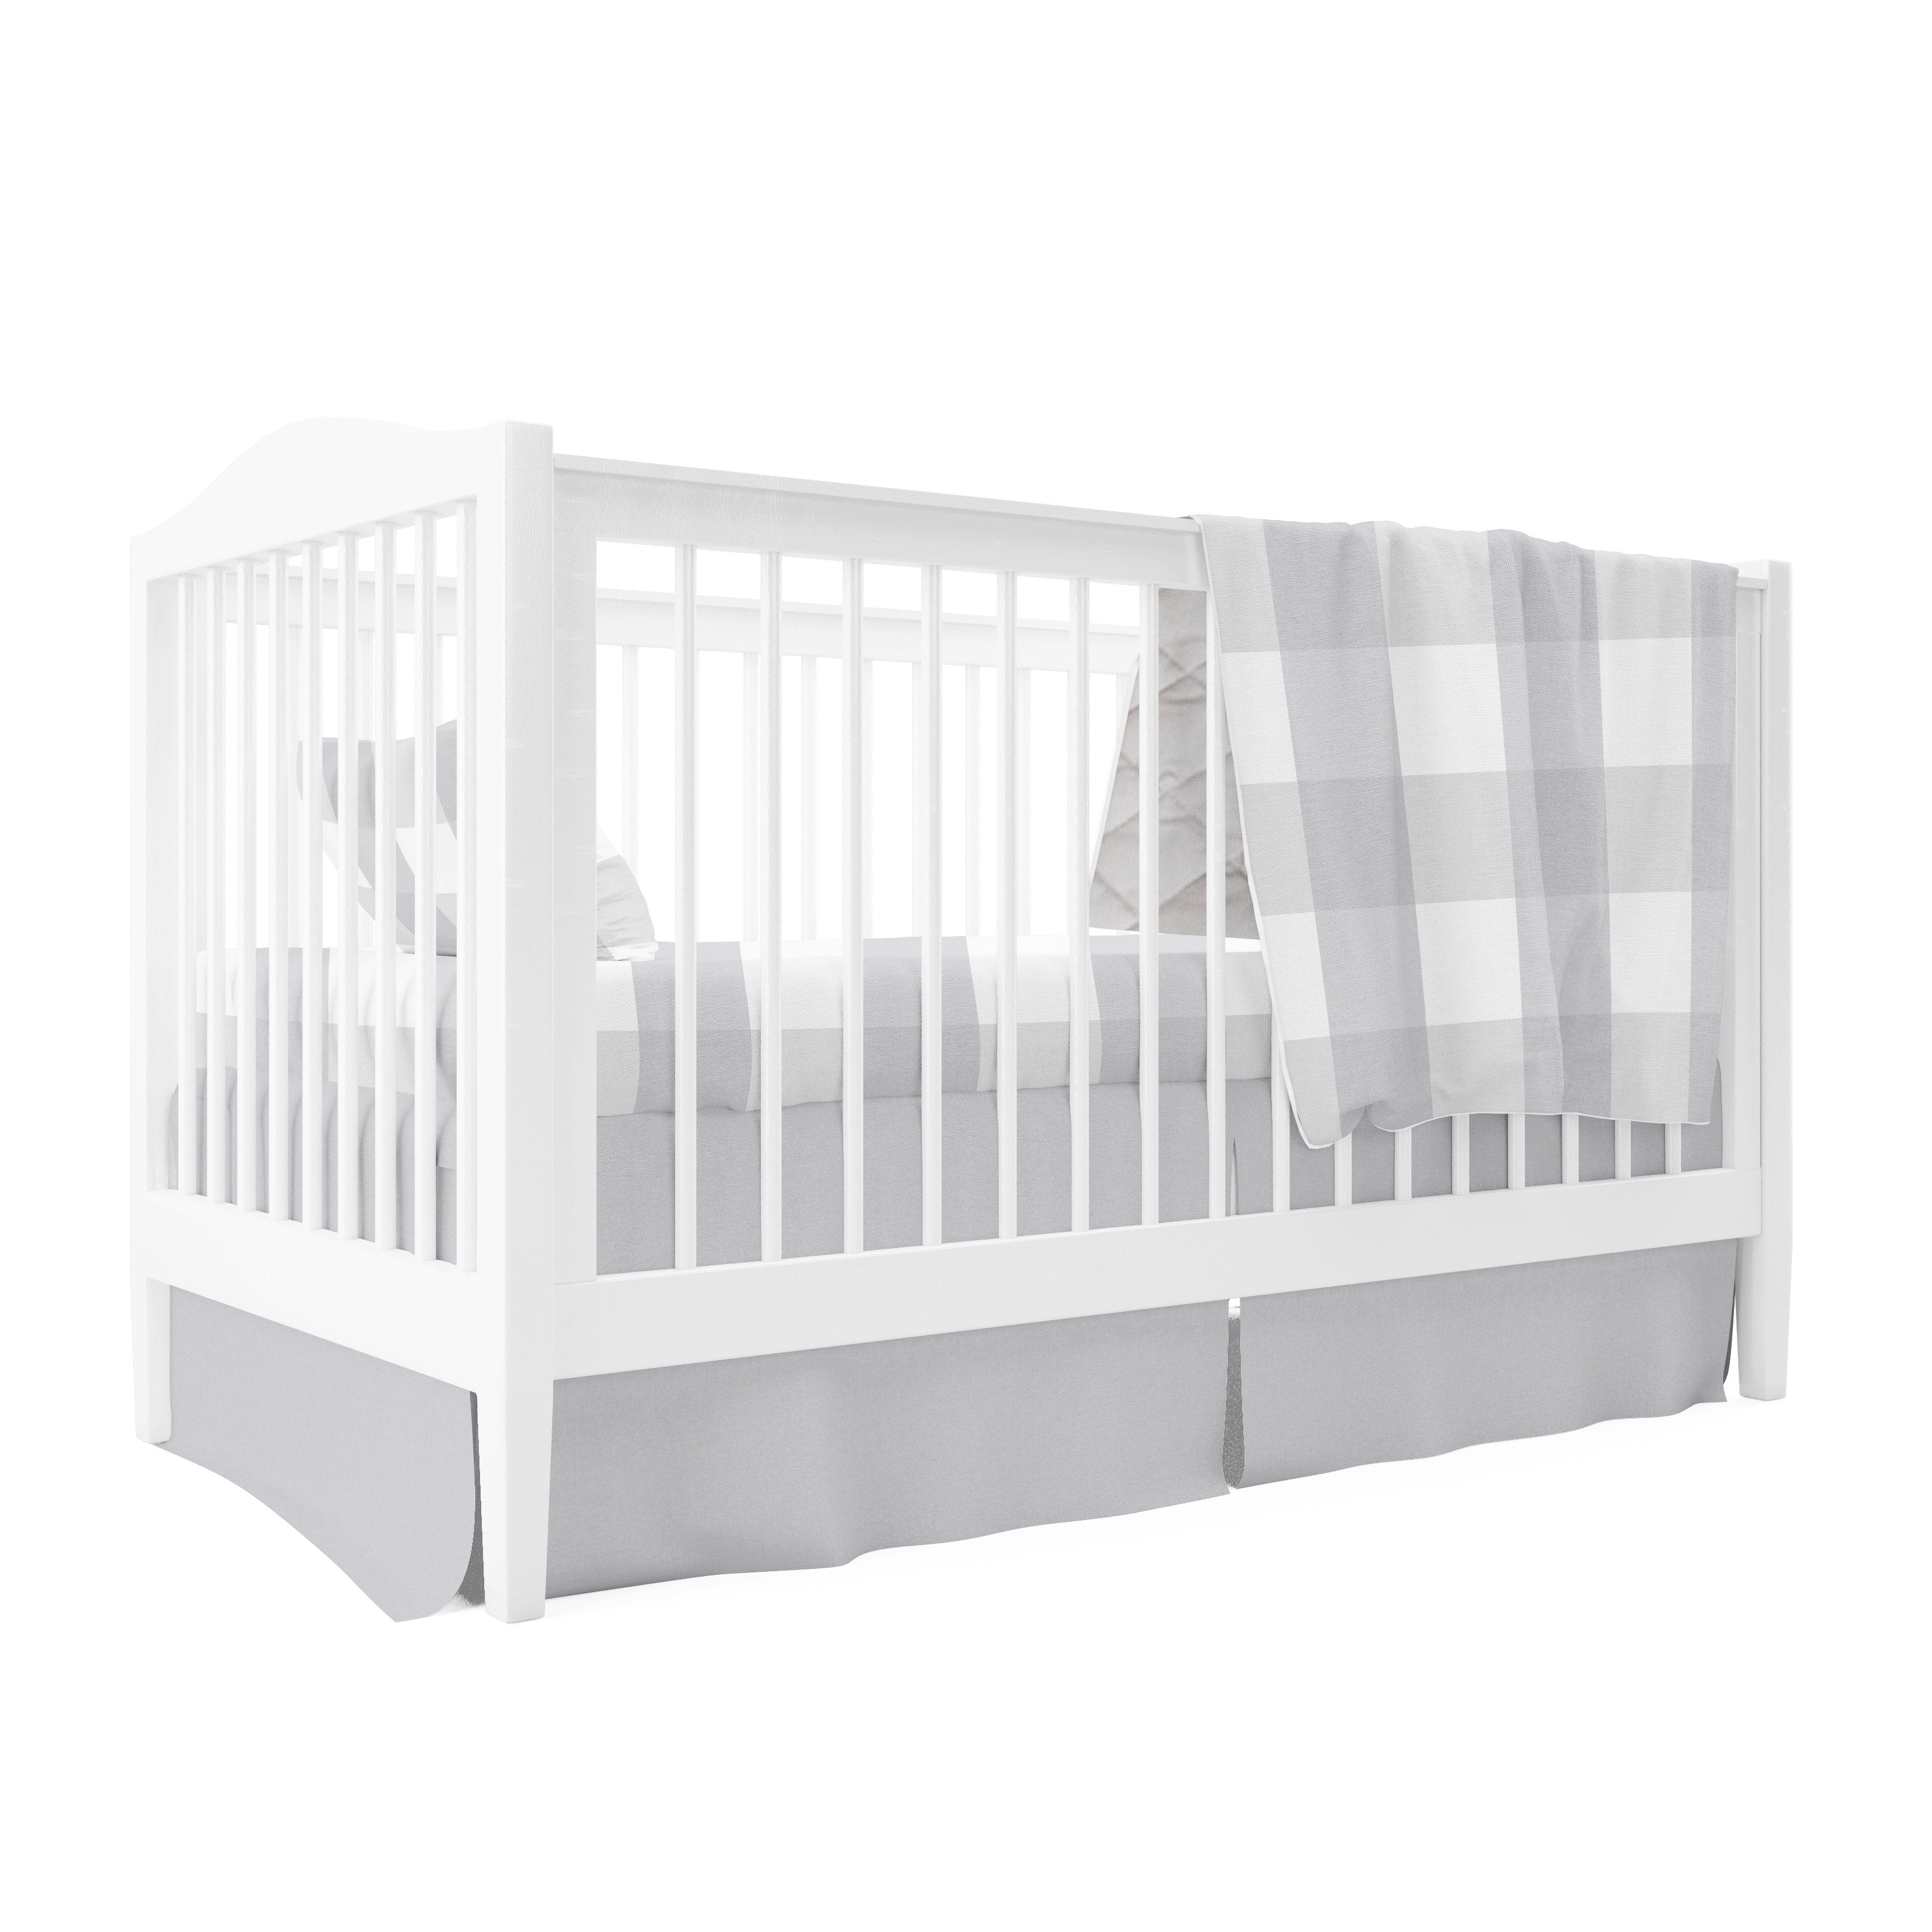 Four Piece Baby Crib Set – Ely's & Co.